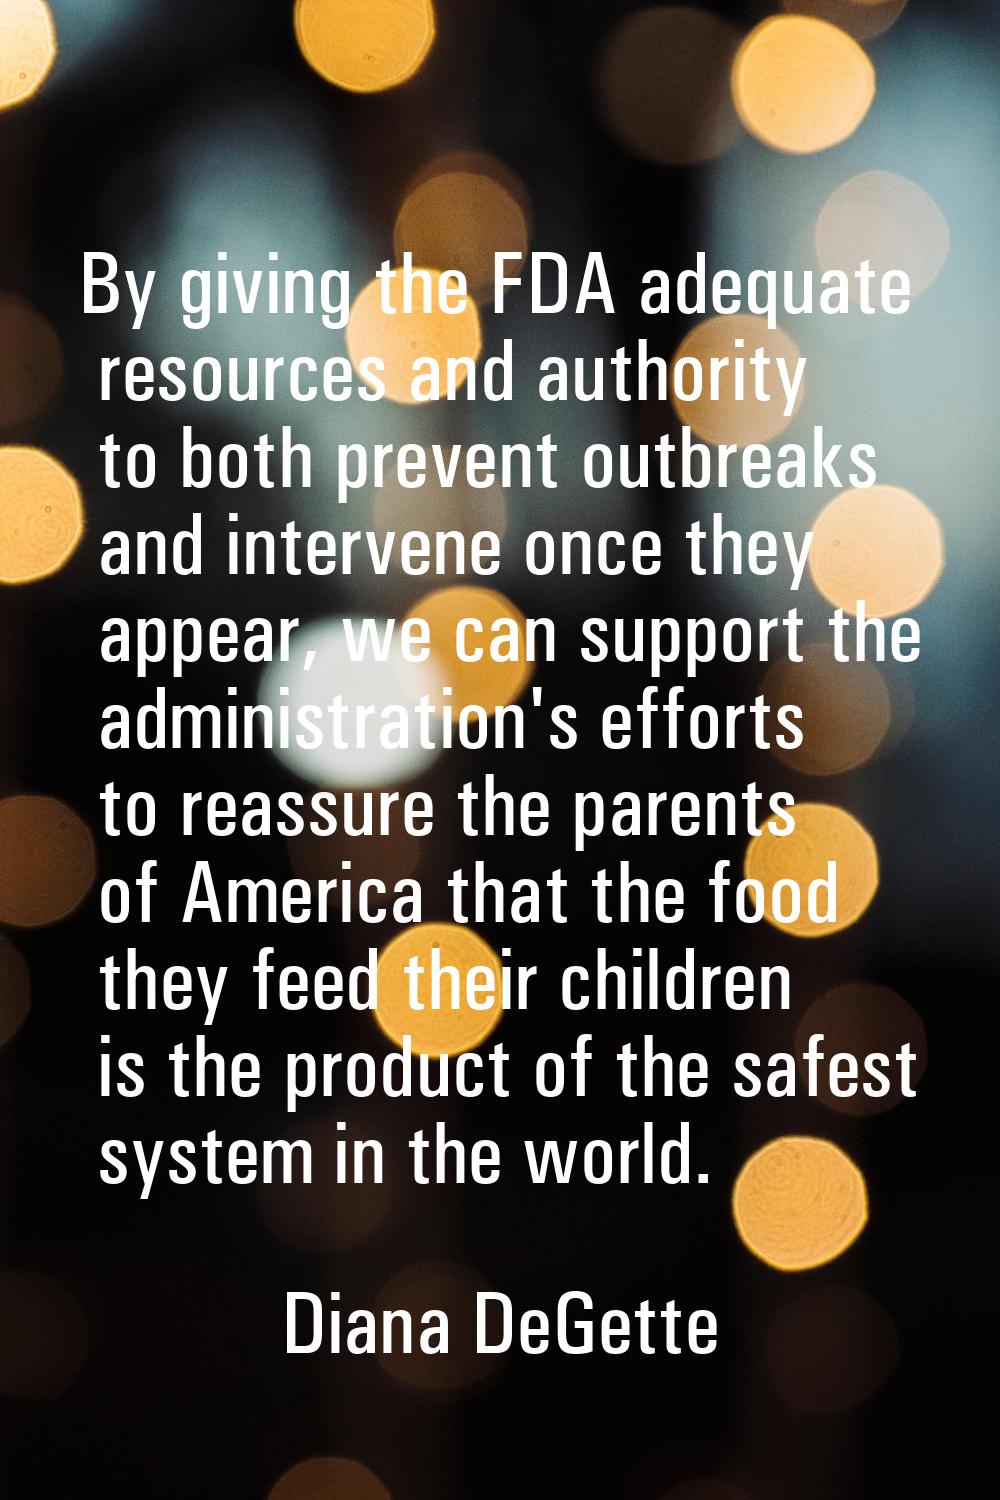 By giving the FDA adequate resources and authority to both prevent outbreaks and intervene once the